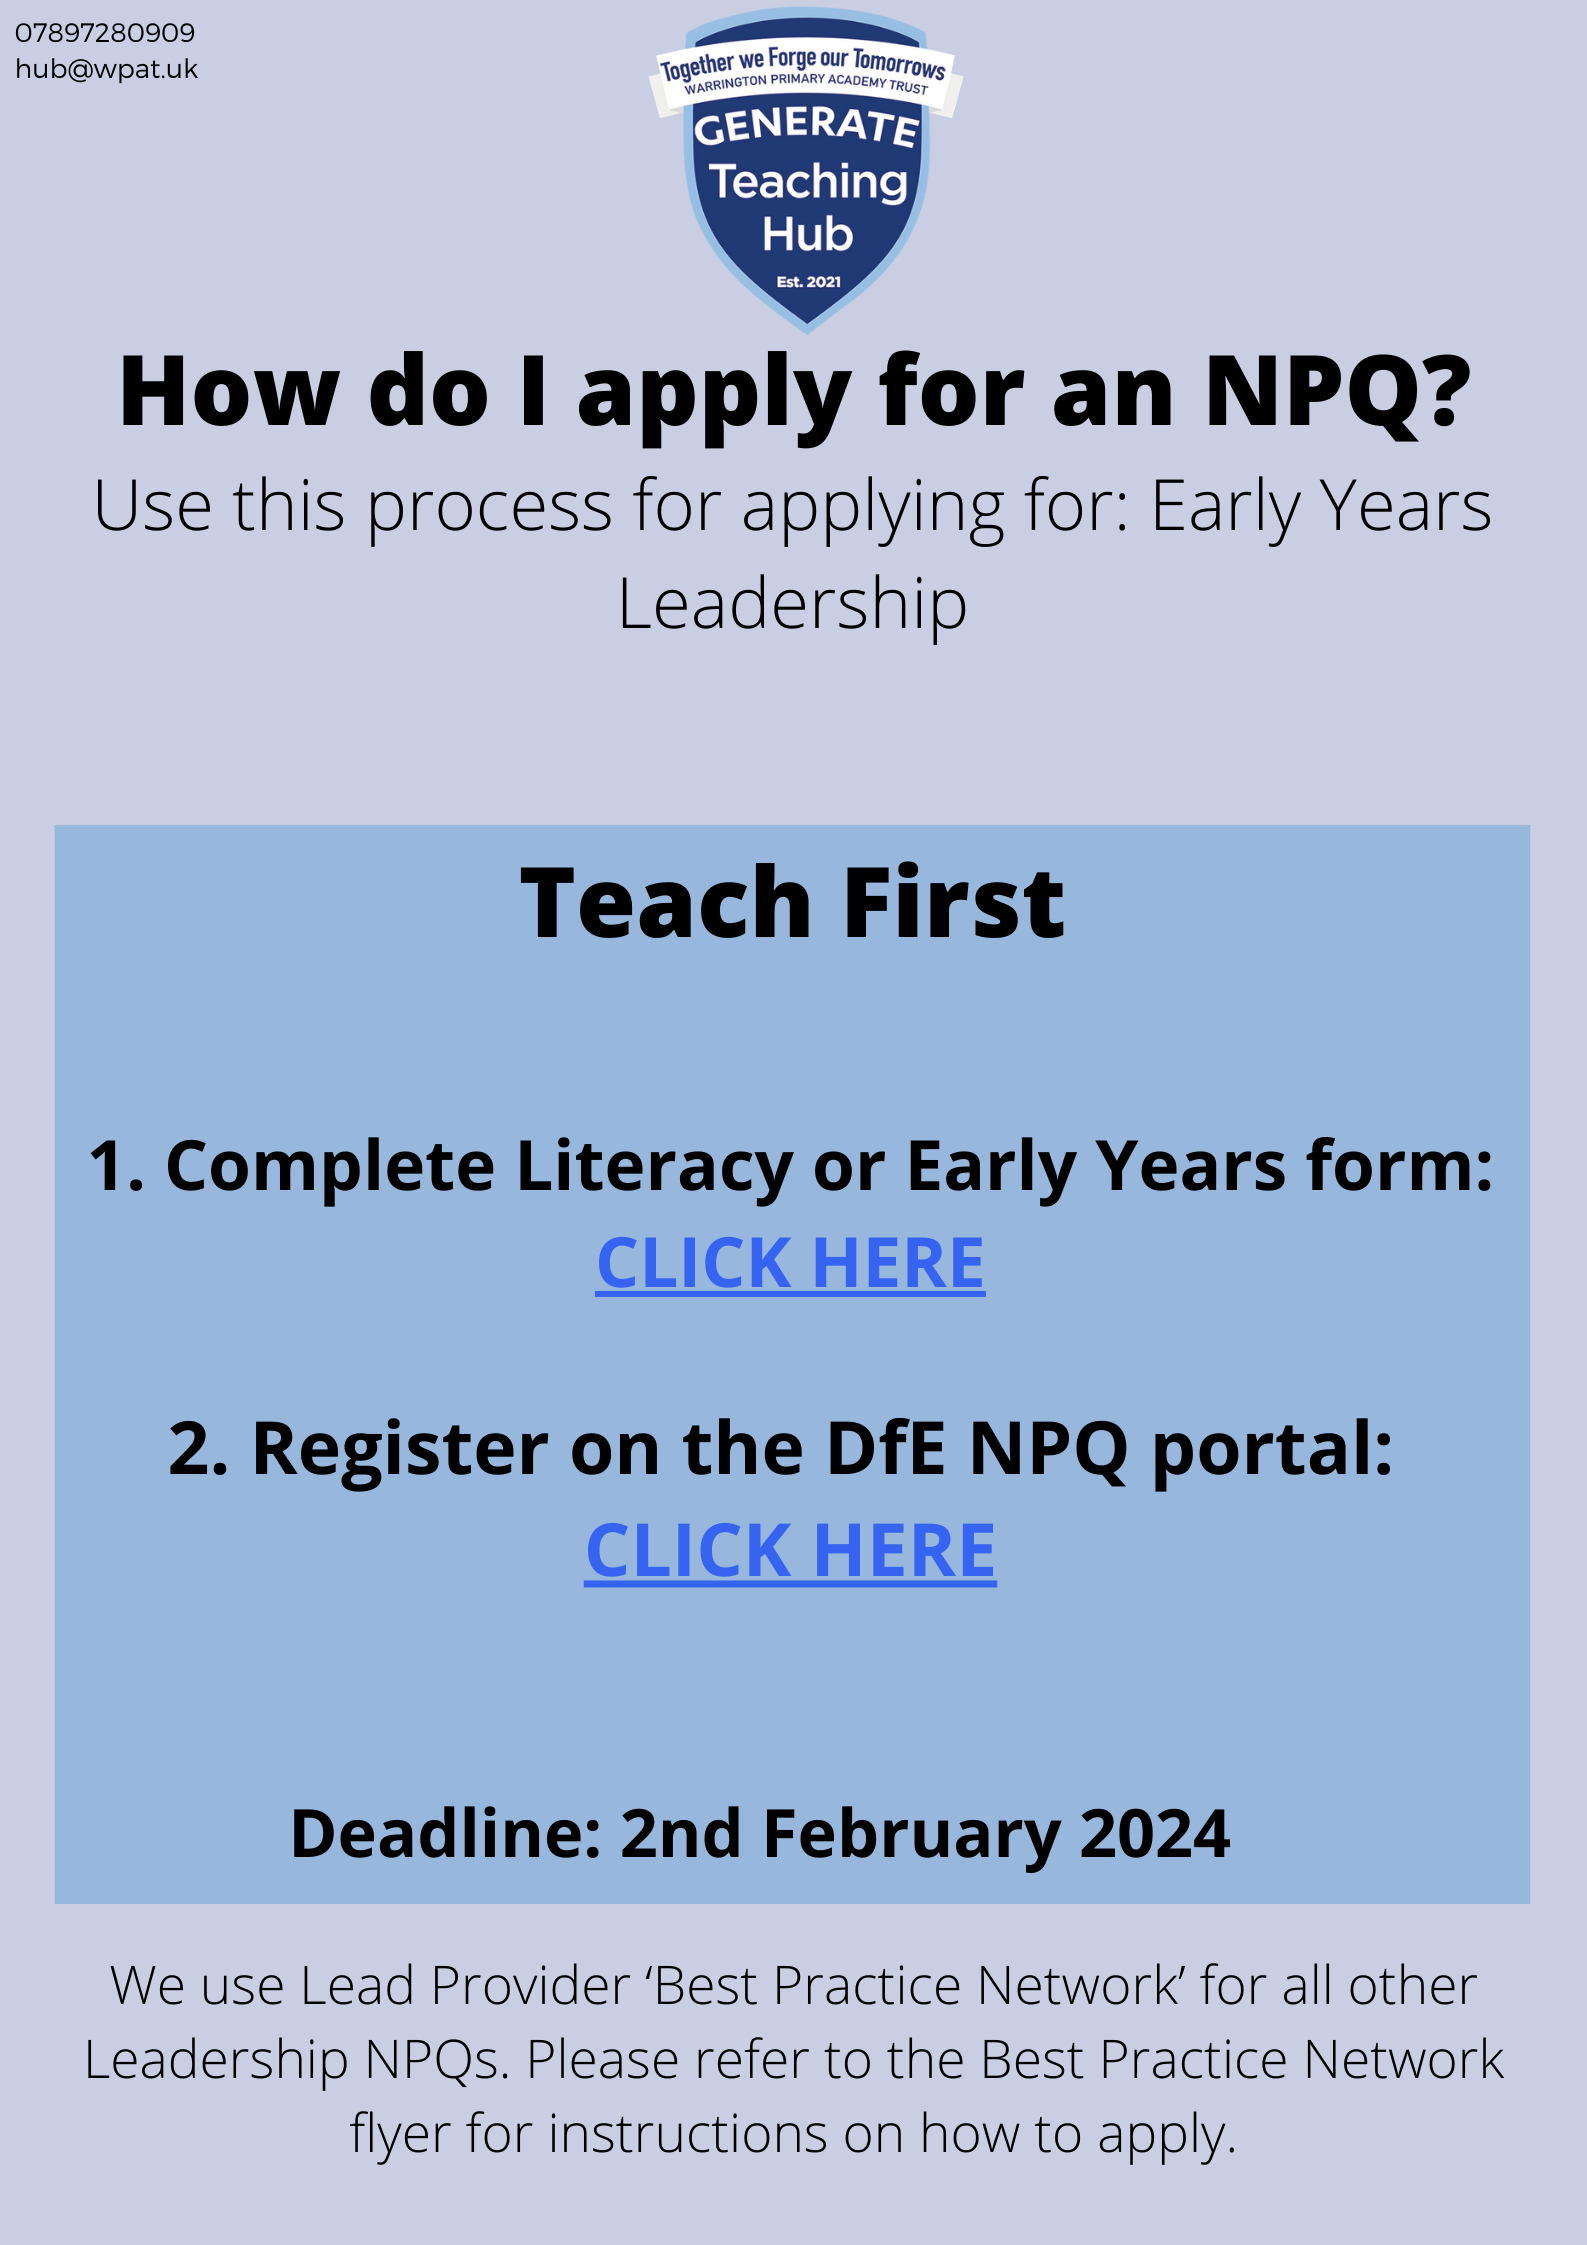 Early Years Leadership NPQ with Teach First